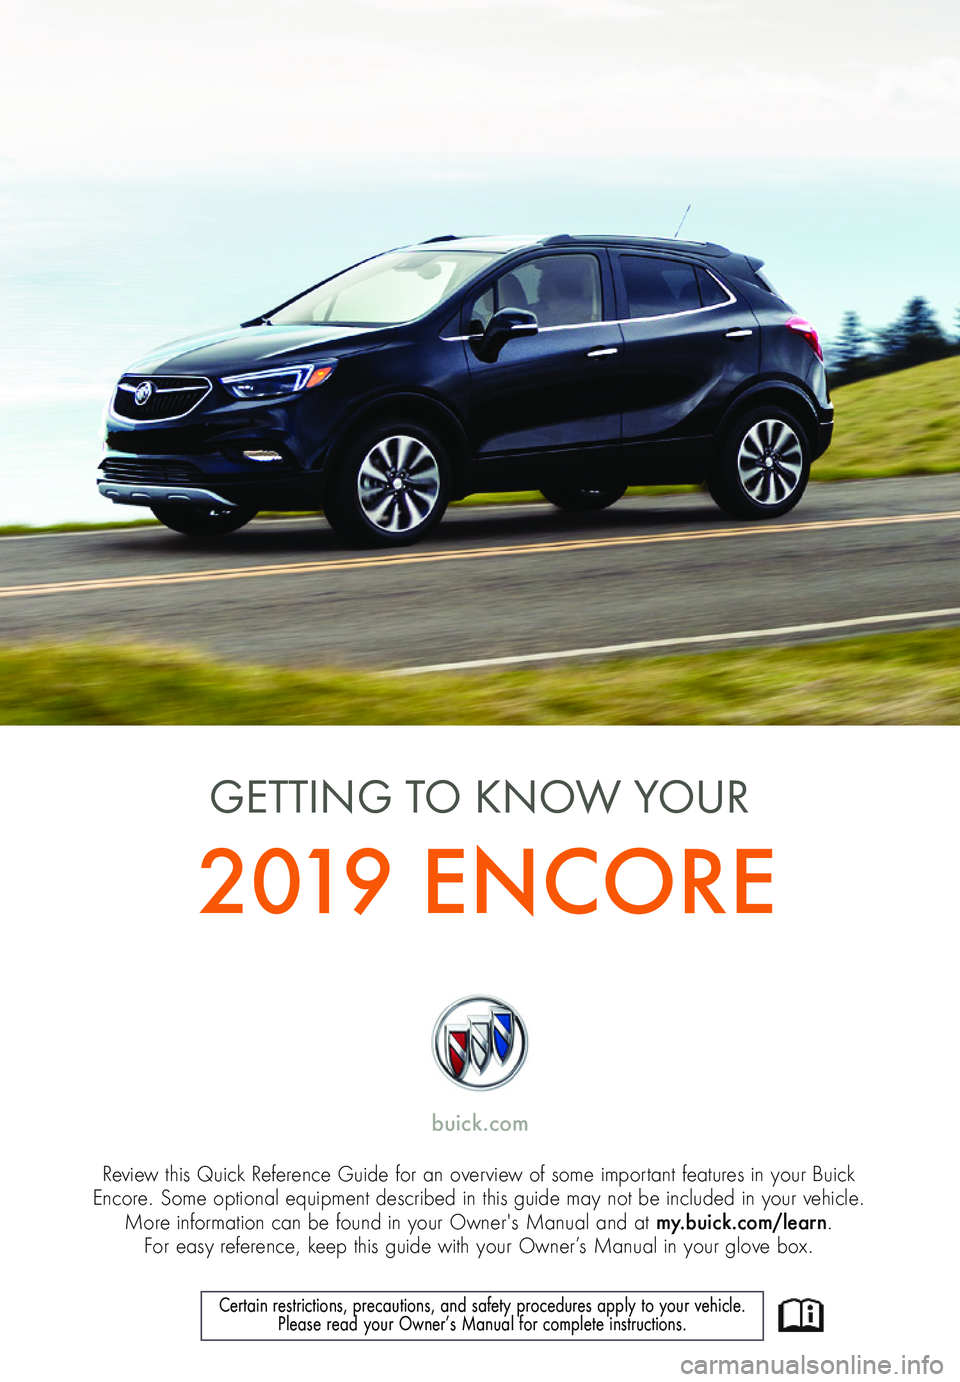 BUICK ENCORE 2019  Get To Know Guide 1
Review this Quick Reference Guide for an overview of some important features in your Buick  Encore. Some optional equipment described in this guide may not be included in your vehicle.  More informa